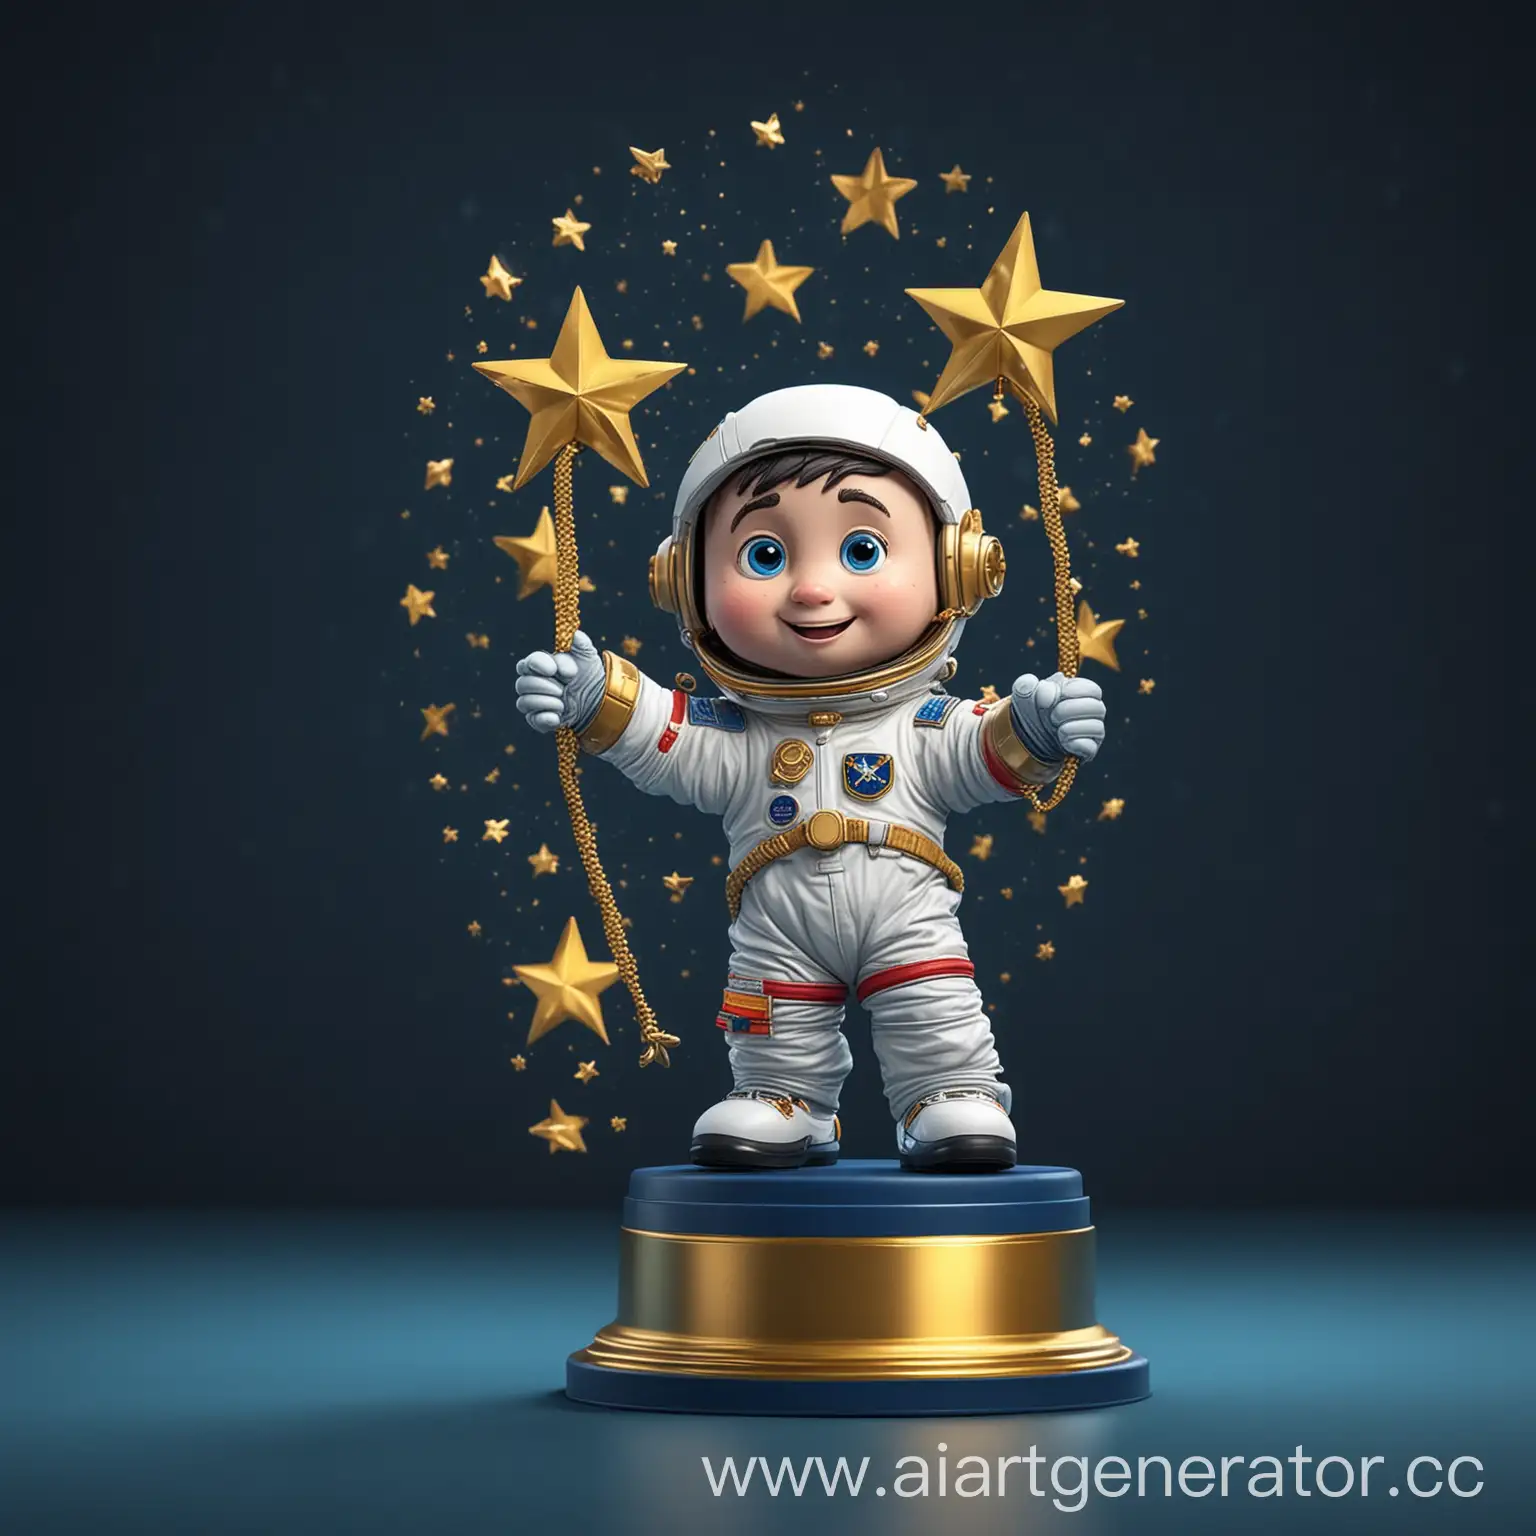 Funny-Cartoon-Astronaut-Surrounded-by-Awards-on-DarkBlue-Background